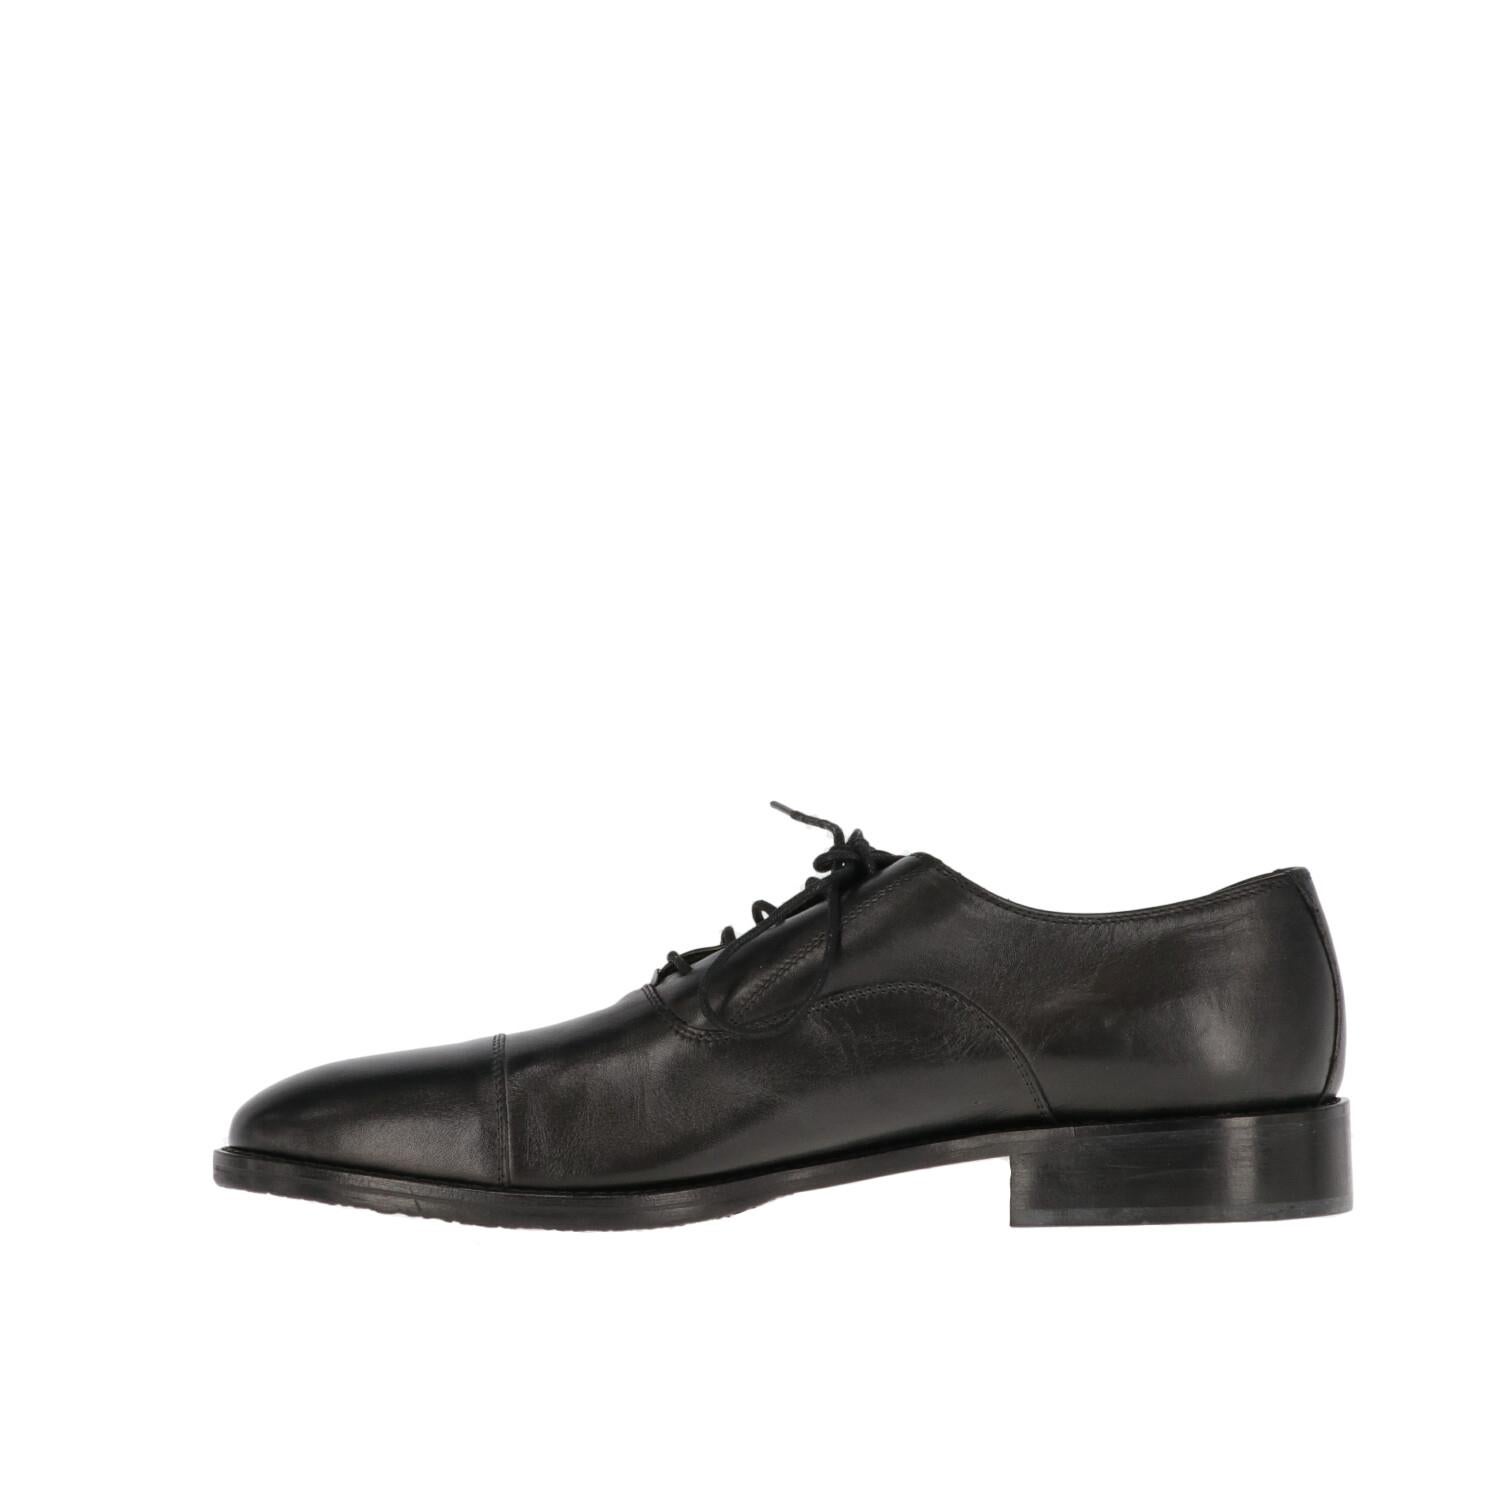 Pollini black genuine leather classic lace-up shoes. Oxford model with tone on tone shoe laces, high shine finish cap toe stitching and round toe.

Size: 44 EU

Heel: 2,8 cm
Insole lenght: 30 cm

Product code: X0166

Notes: The shoes are new but